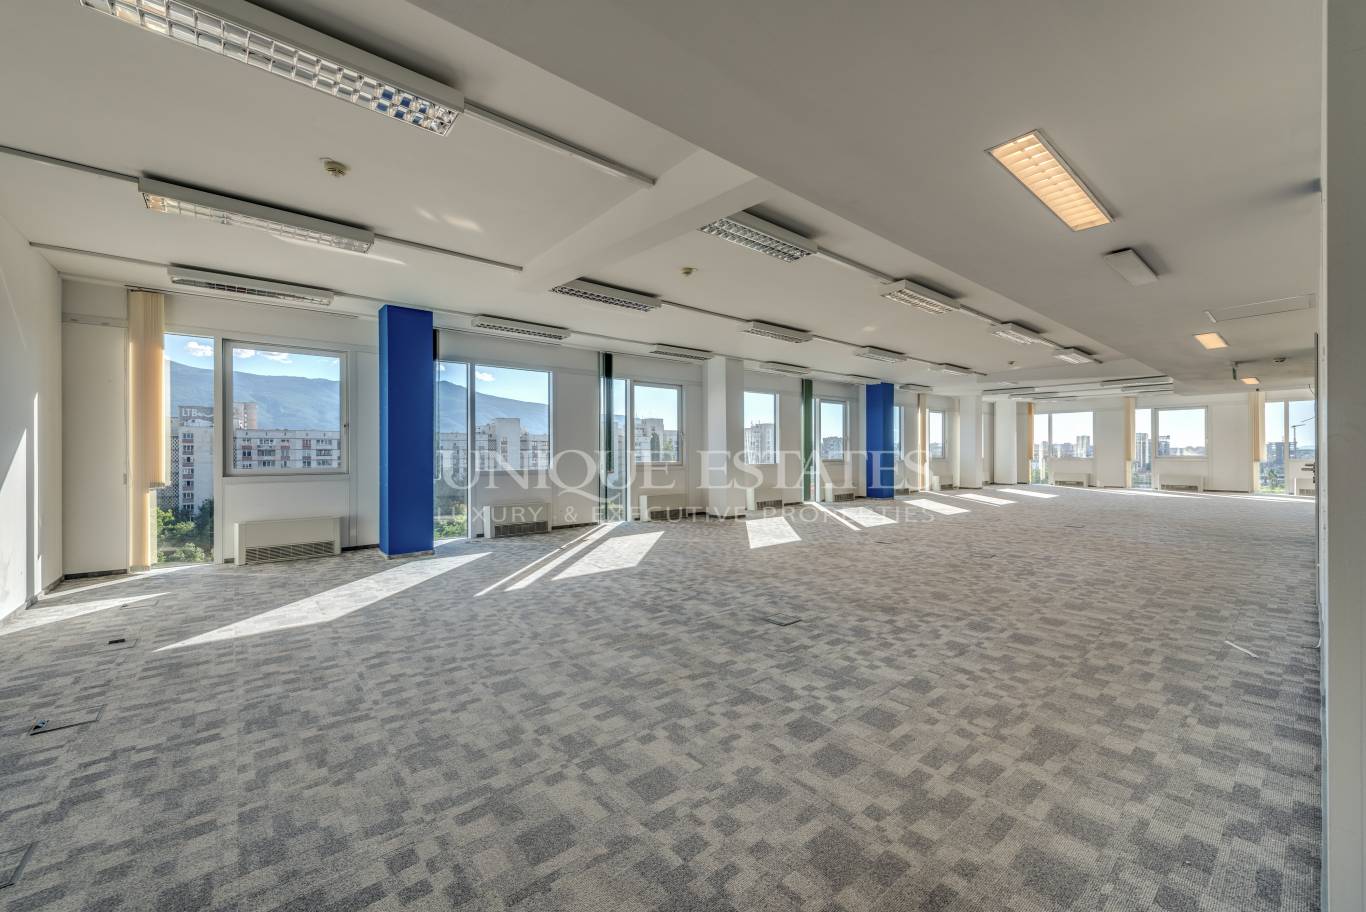 Office for rent in Sofia,  with listing ID: K15521 - image 12